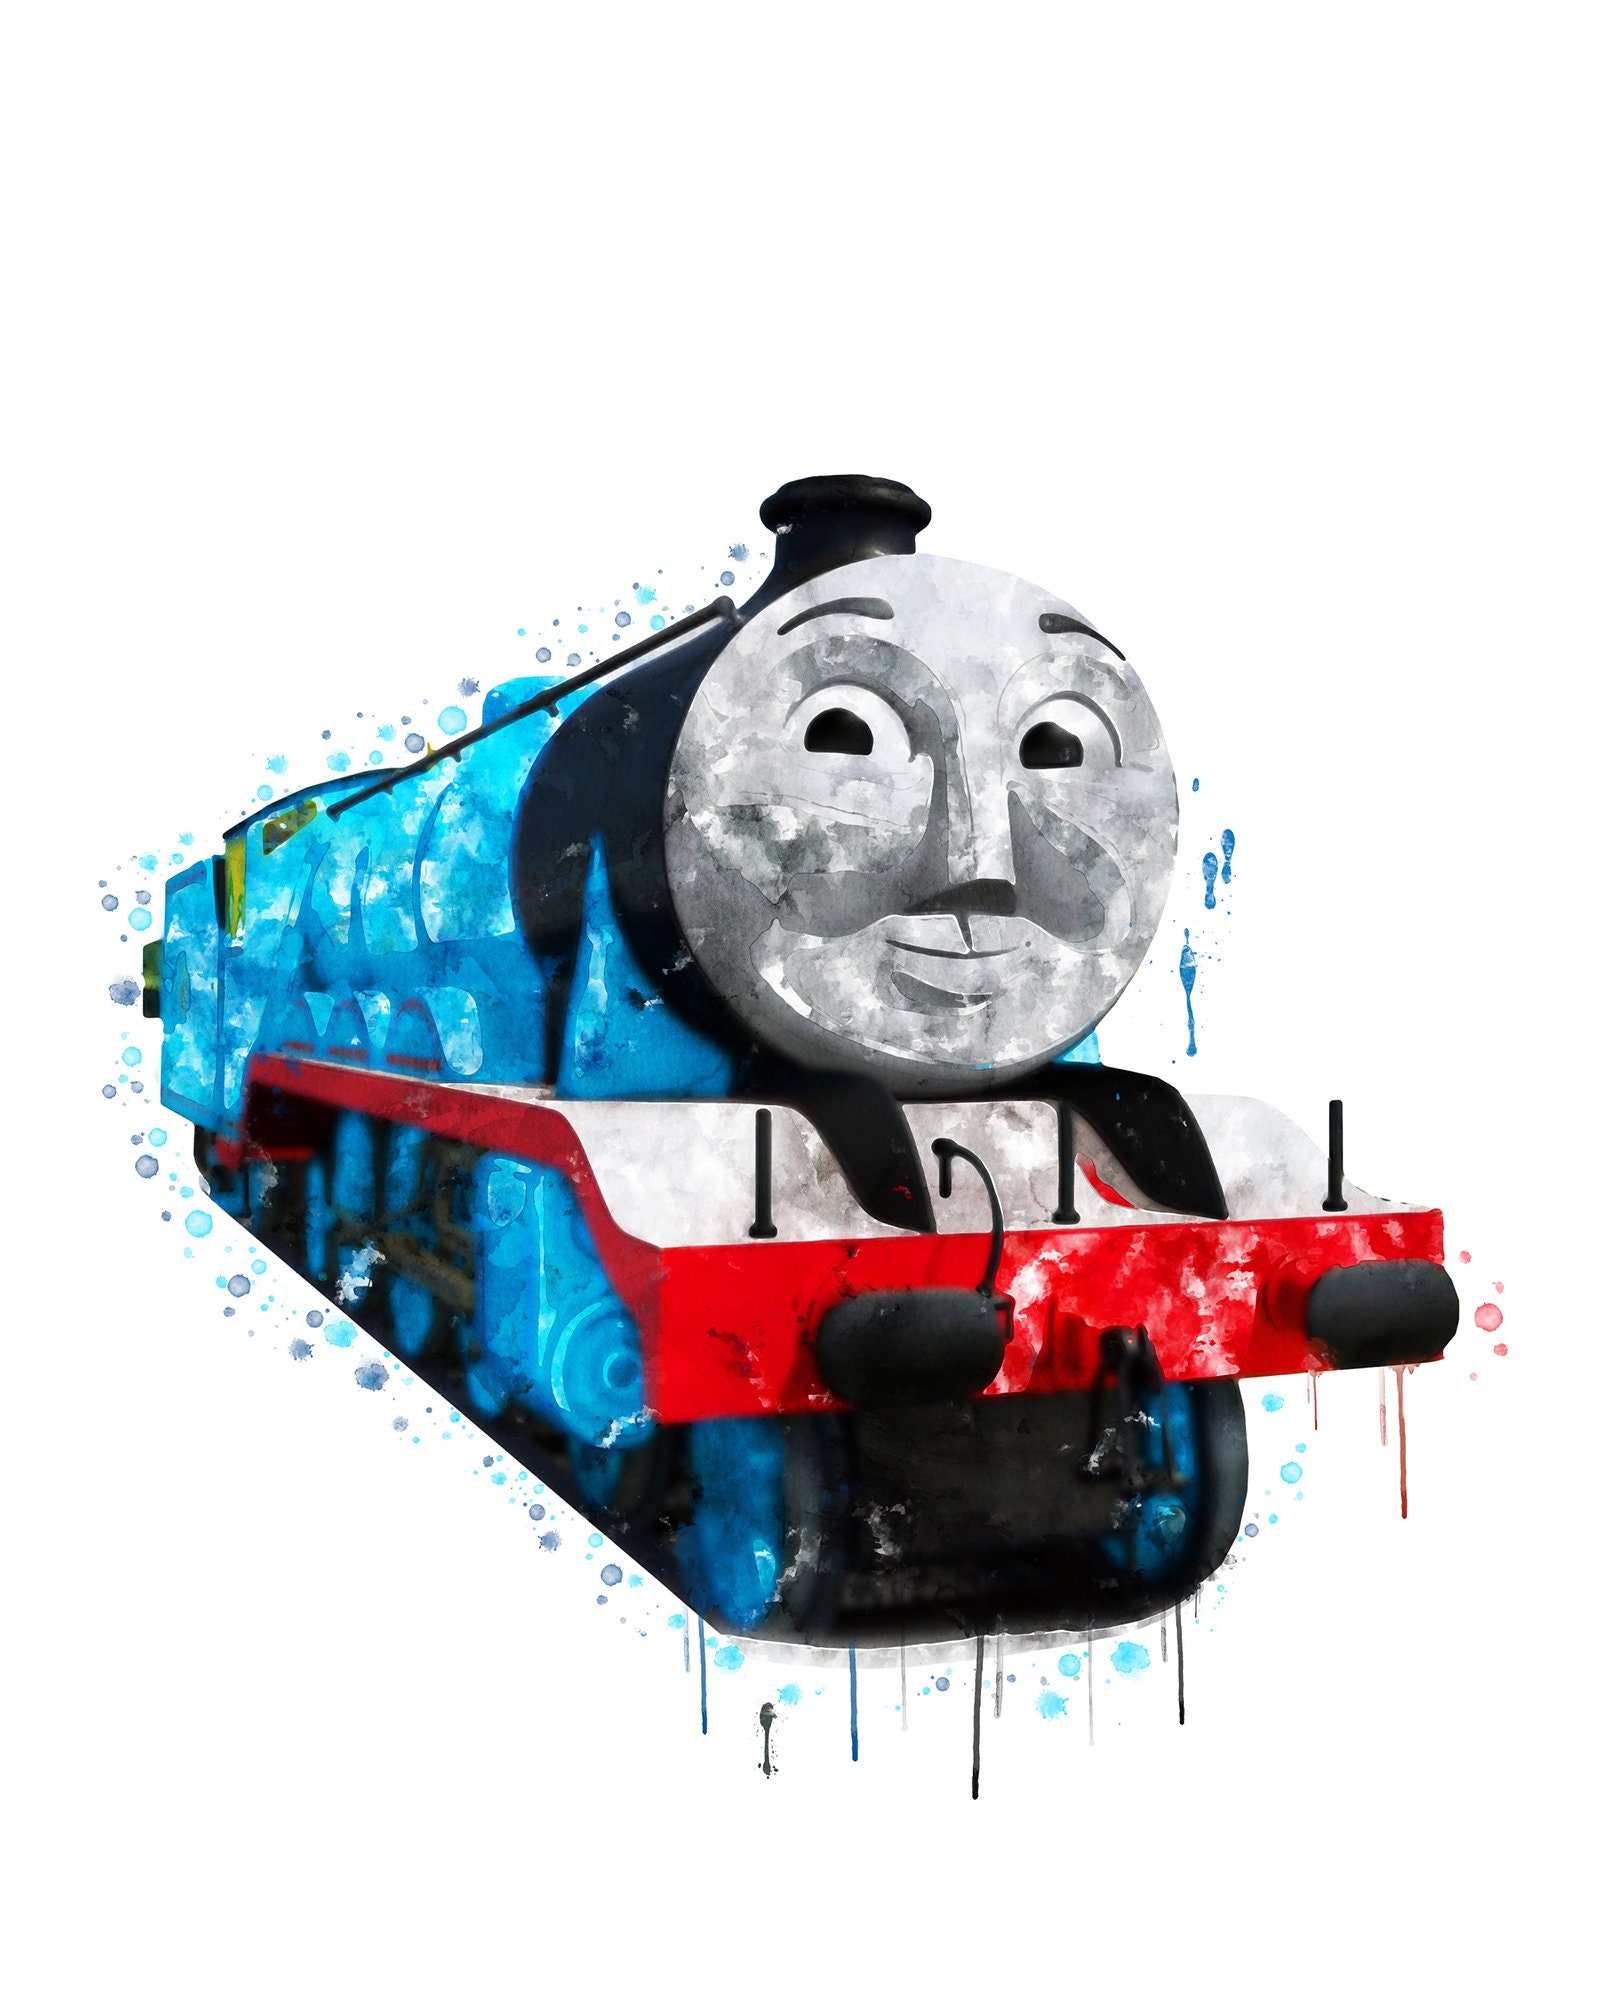 Thomas and Friends Print Gordon Poster Tank Engine Watercolor - Etsy ...